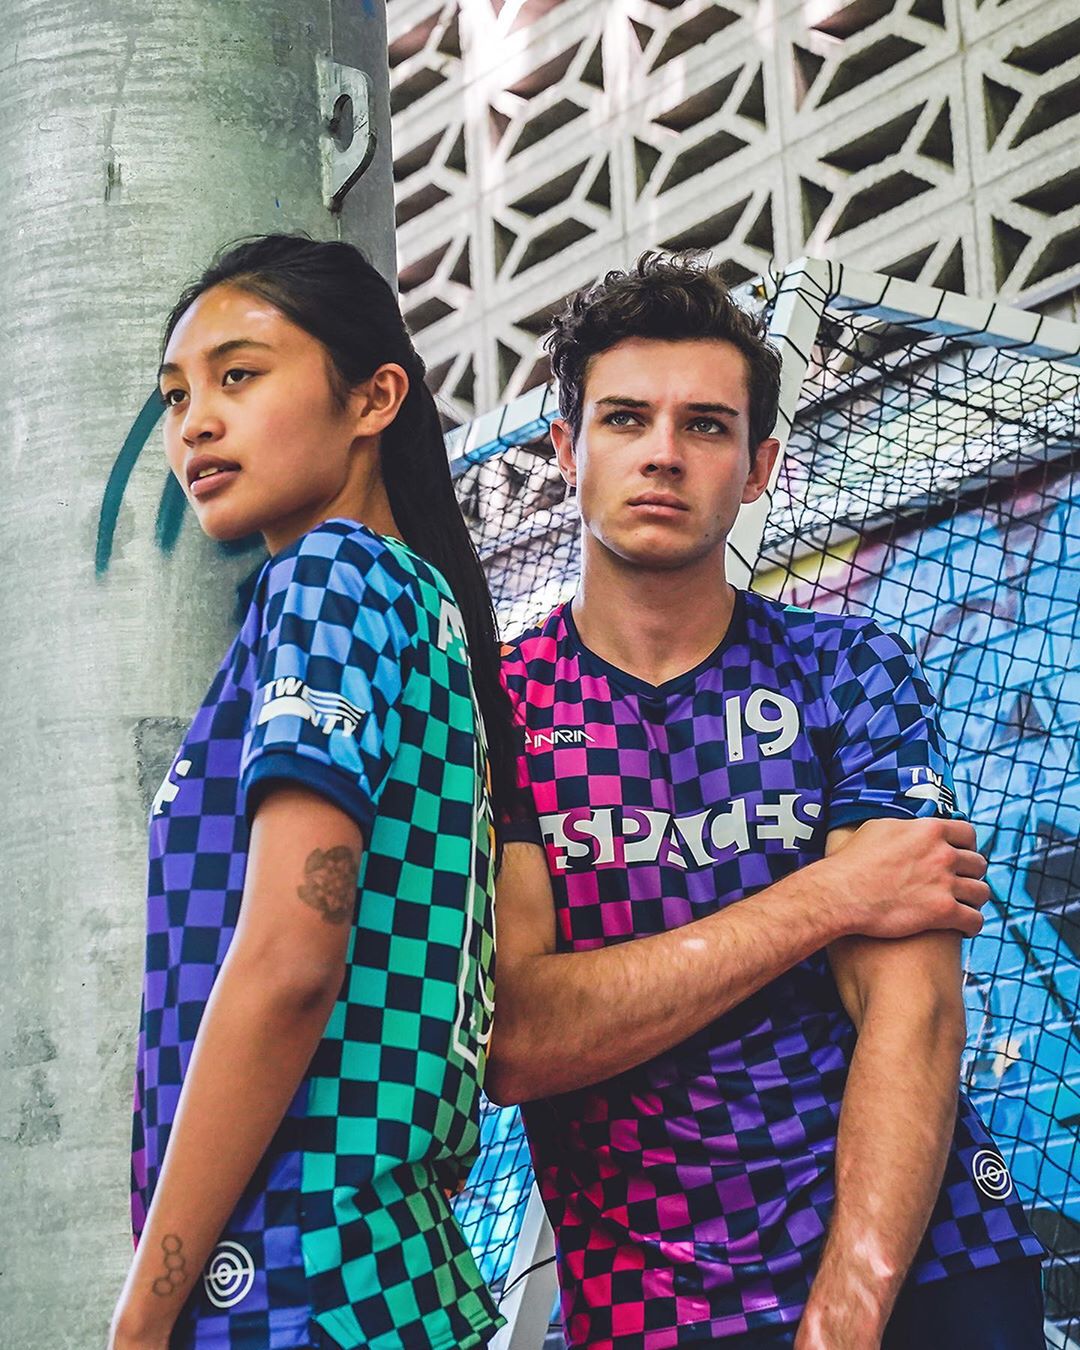 A+ Spaces [Across Spaces] for Pride ‘19. 
Pick one up at the link in the bio // We’re donating profits to @the519 #pride #inariasoccer #pridetoronto